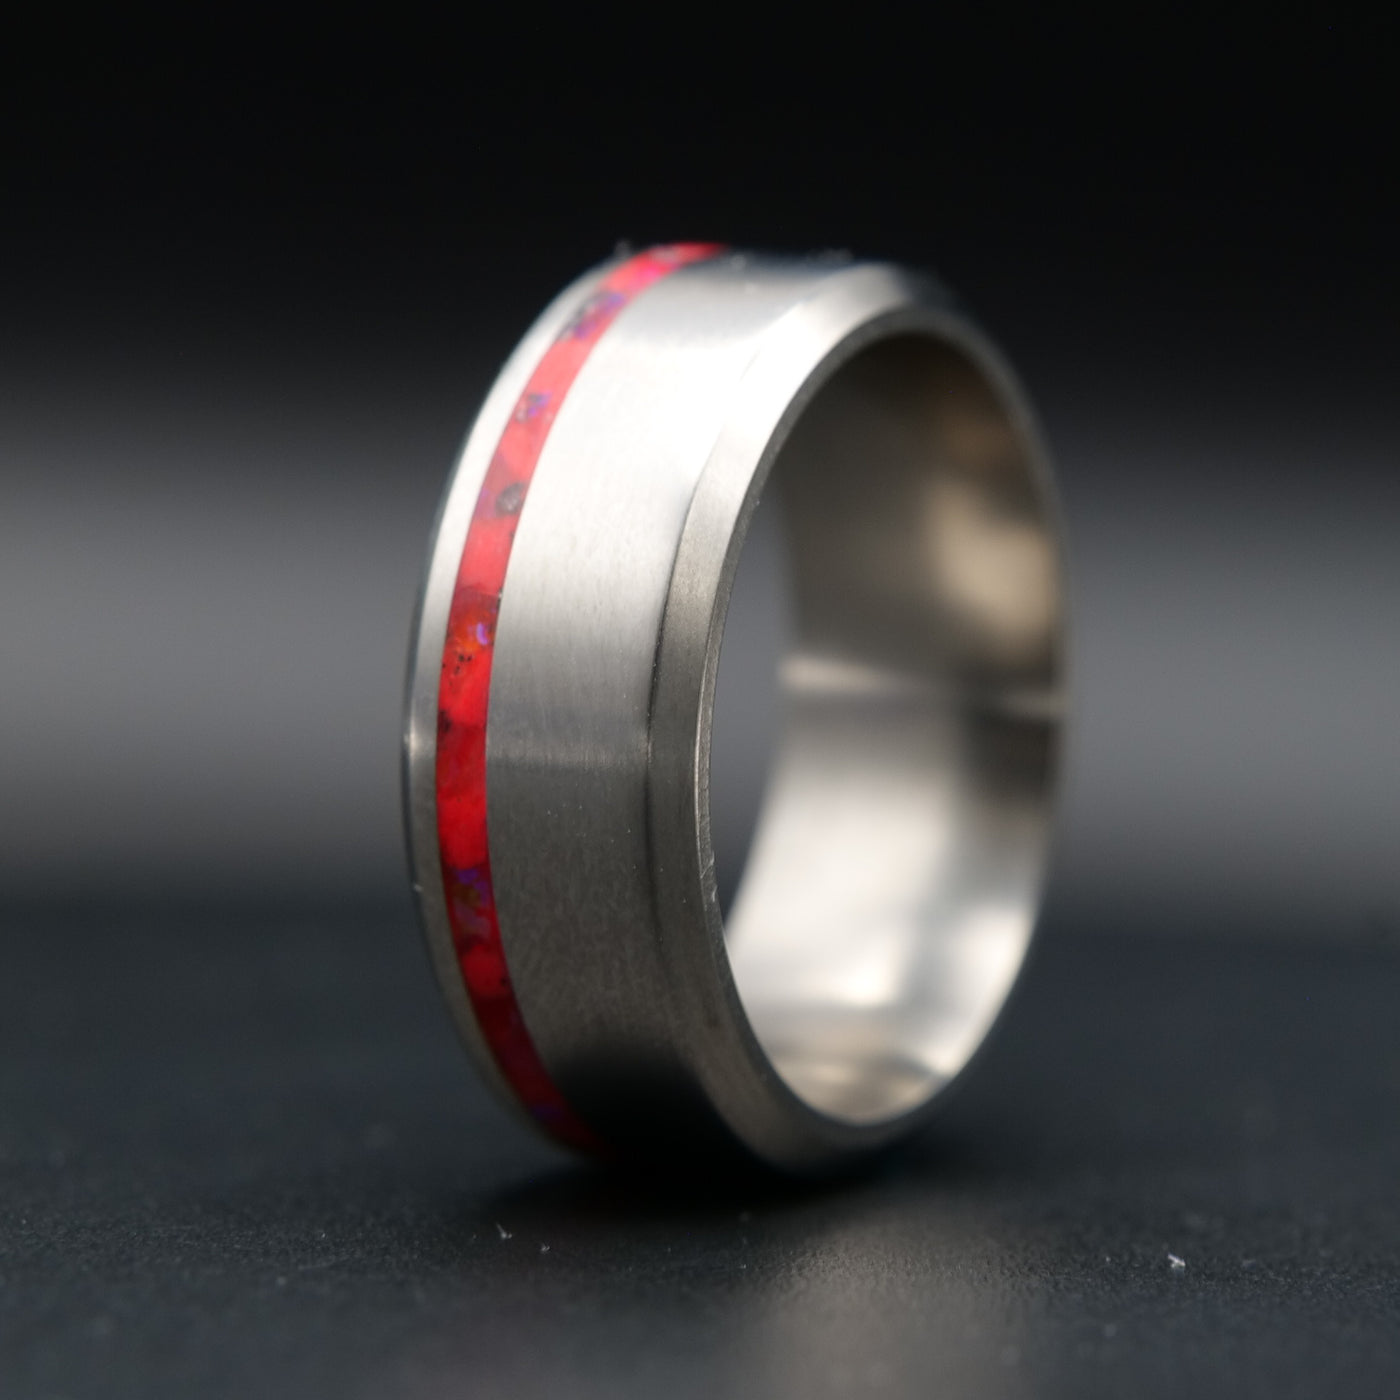 Titanium Glowstone Ring | Offset Inlay Ring with Crushed Opal - Patrick Adair Designs